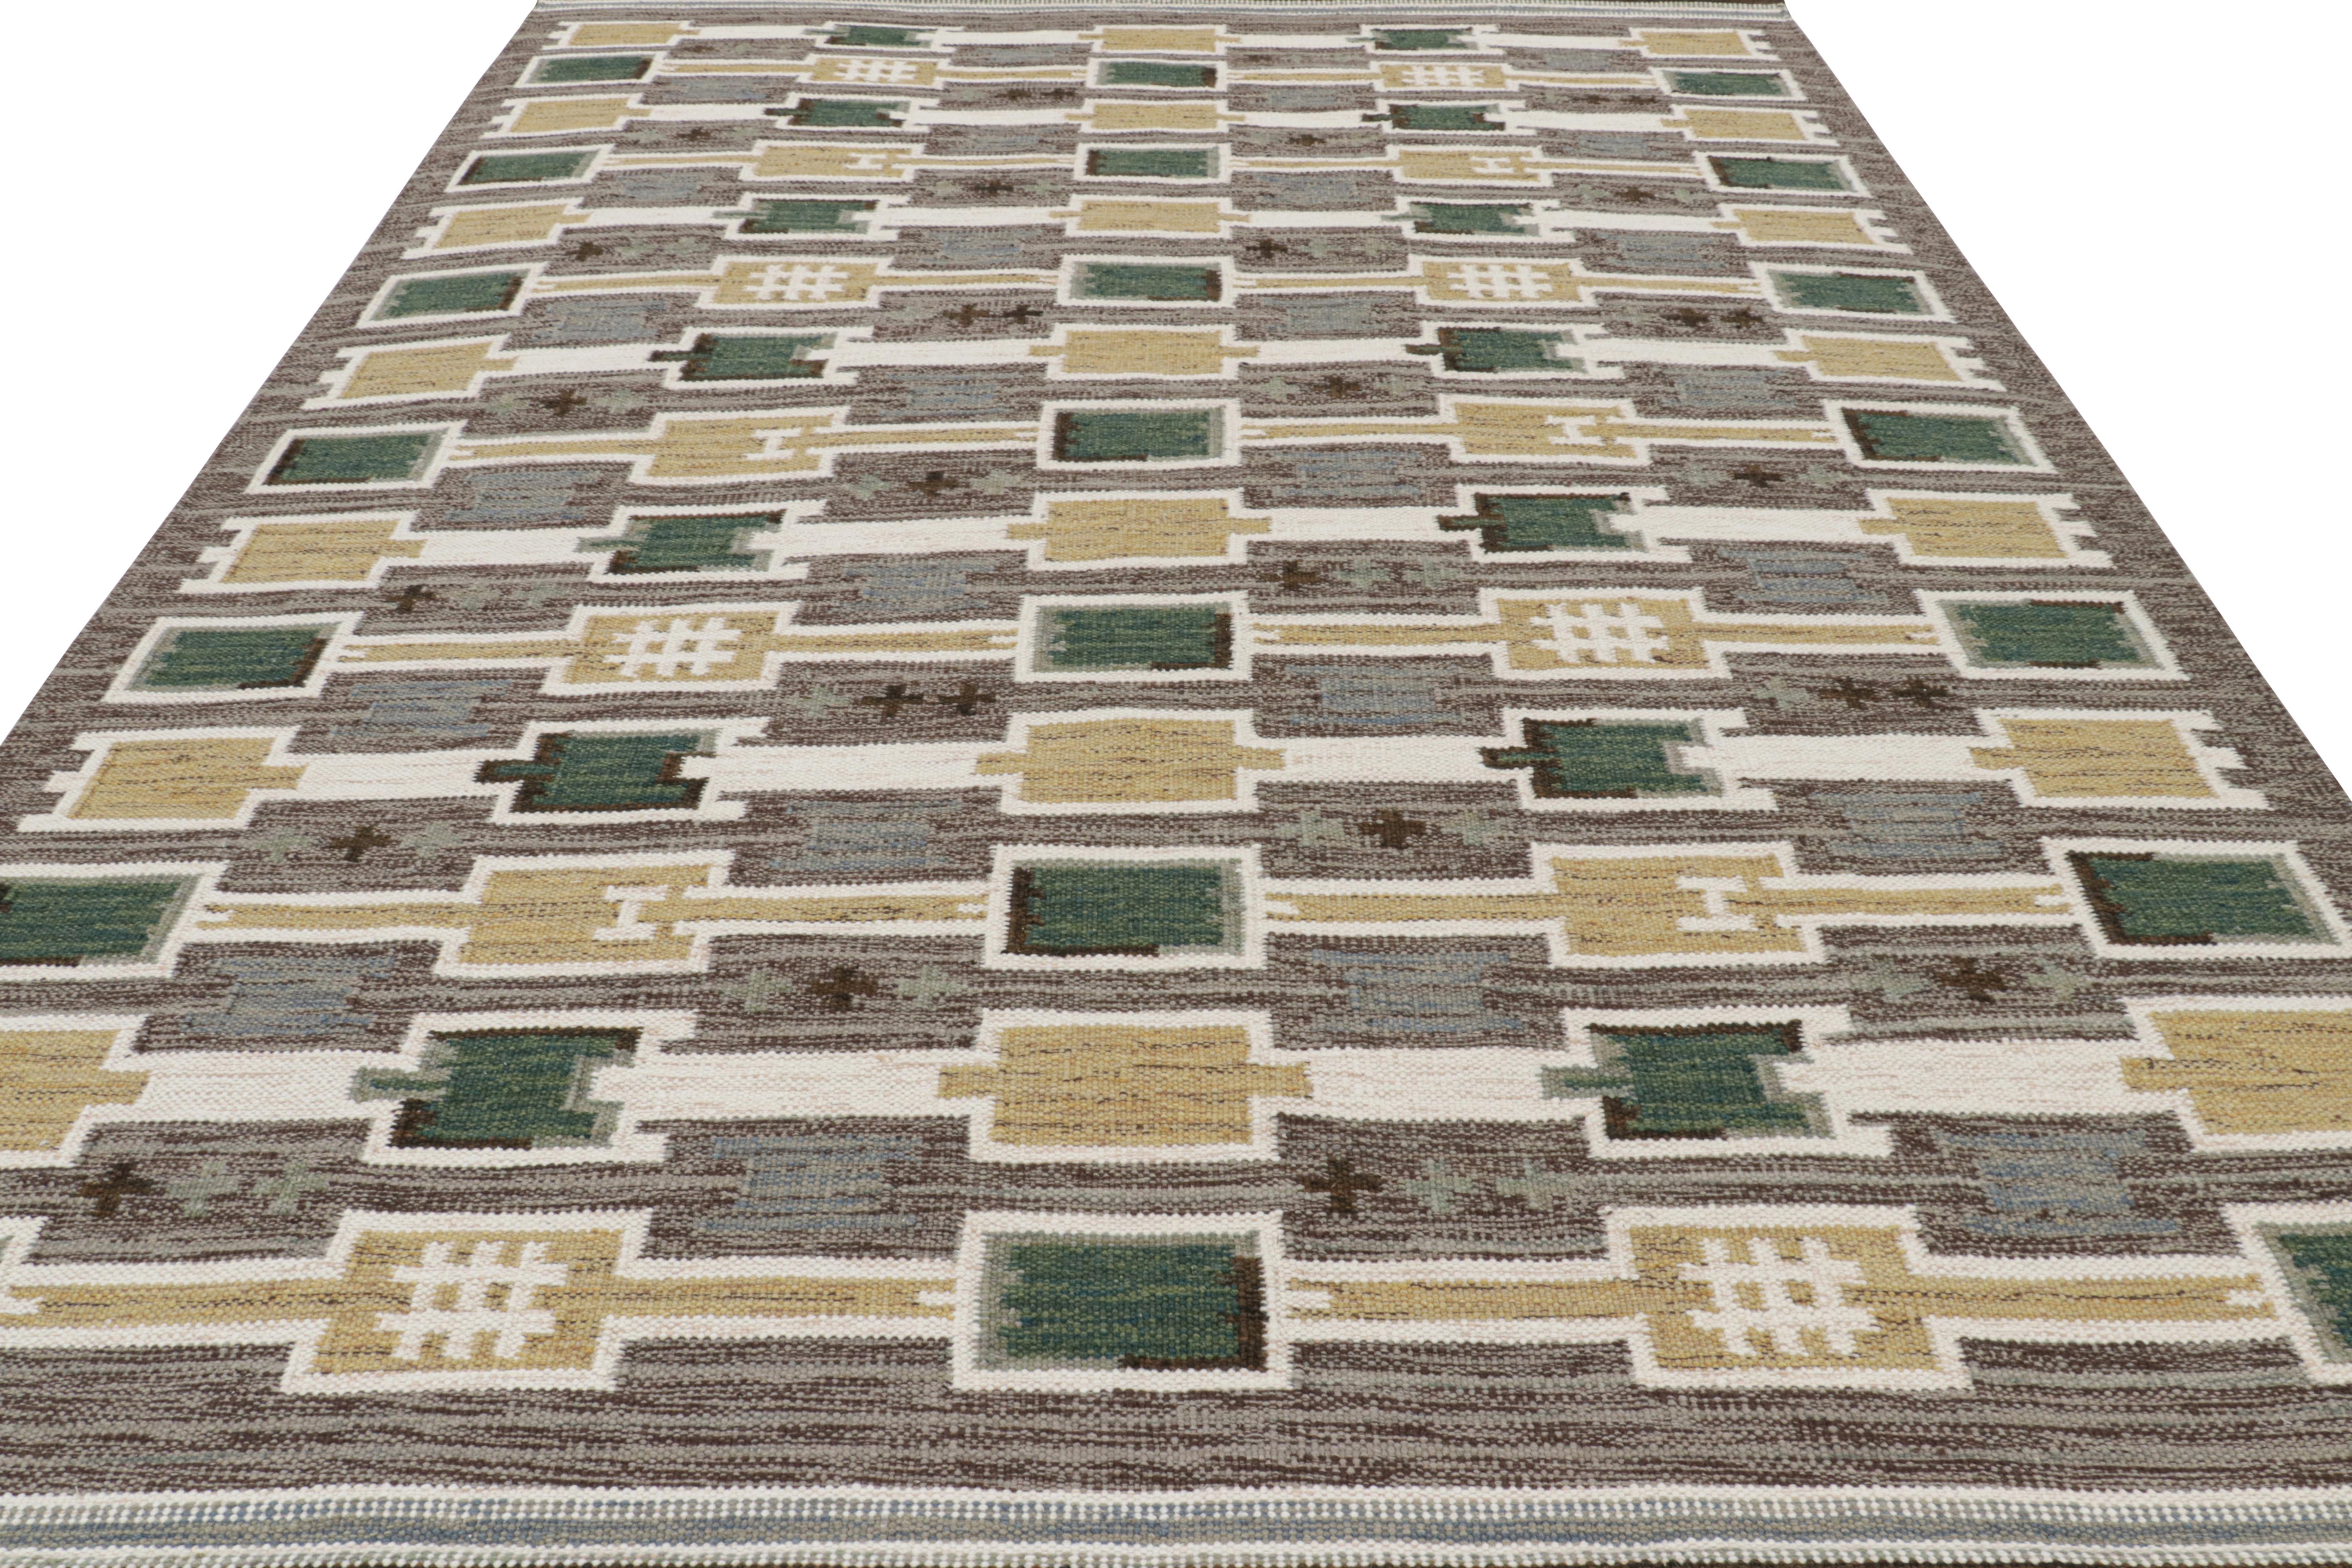 Hand-Woven Rug & Kilim’s Scandinavian Style Rug with Patterns in Green, Gold and Brown For Sale